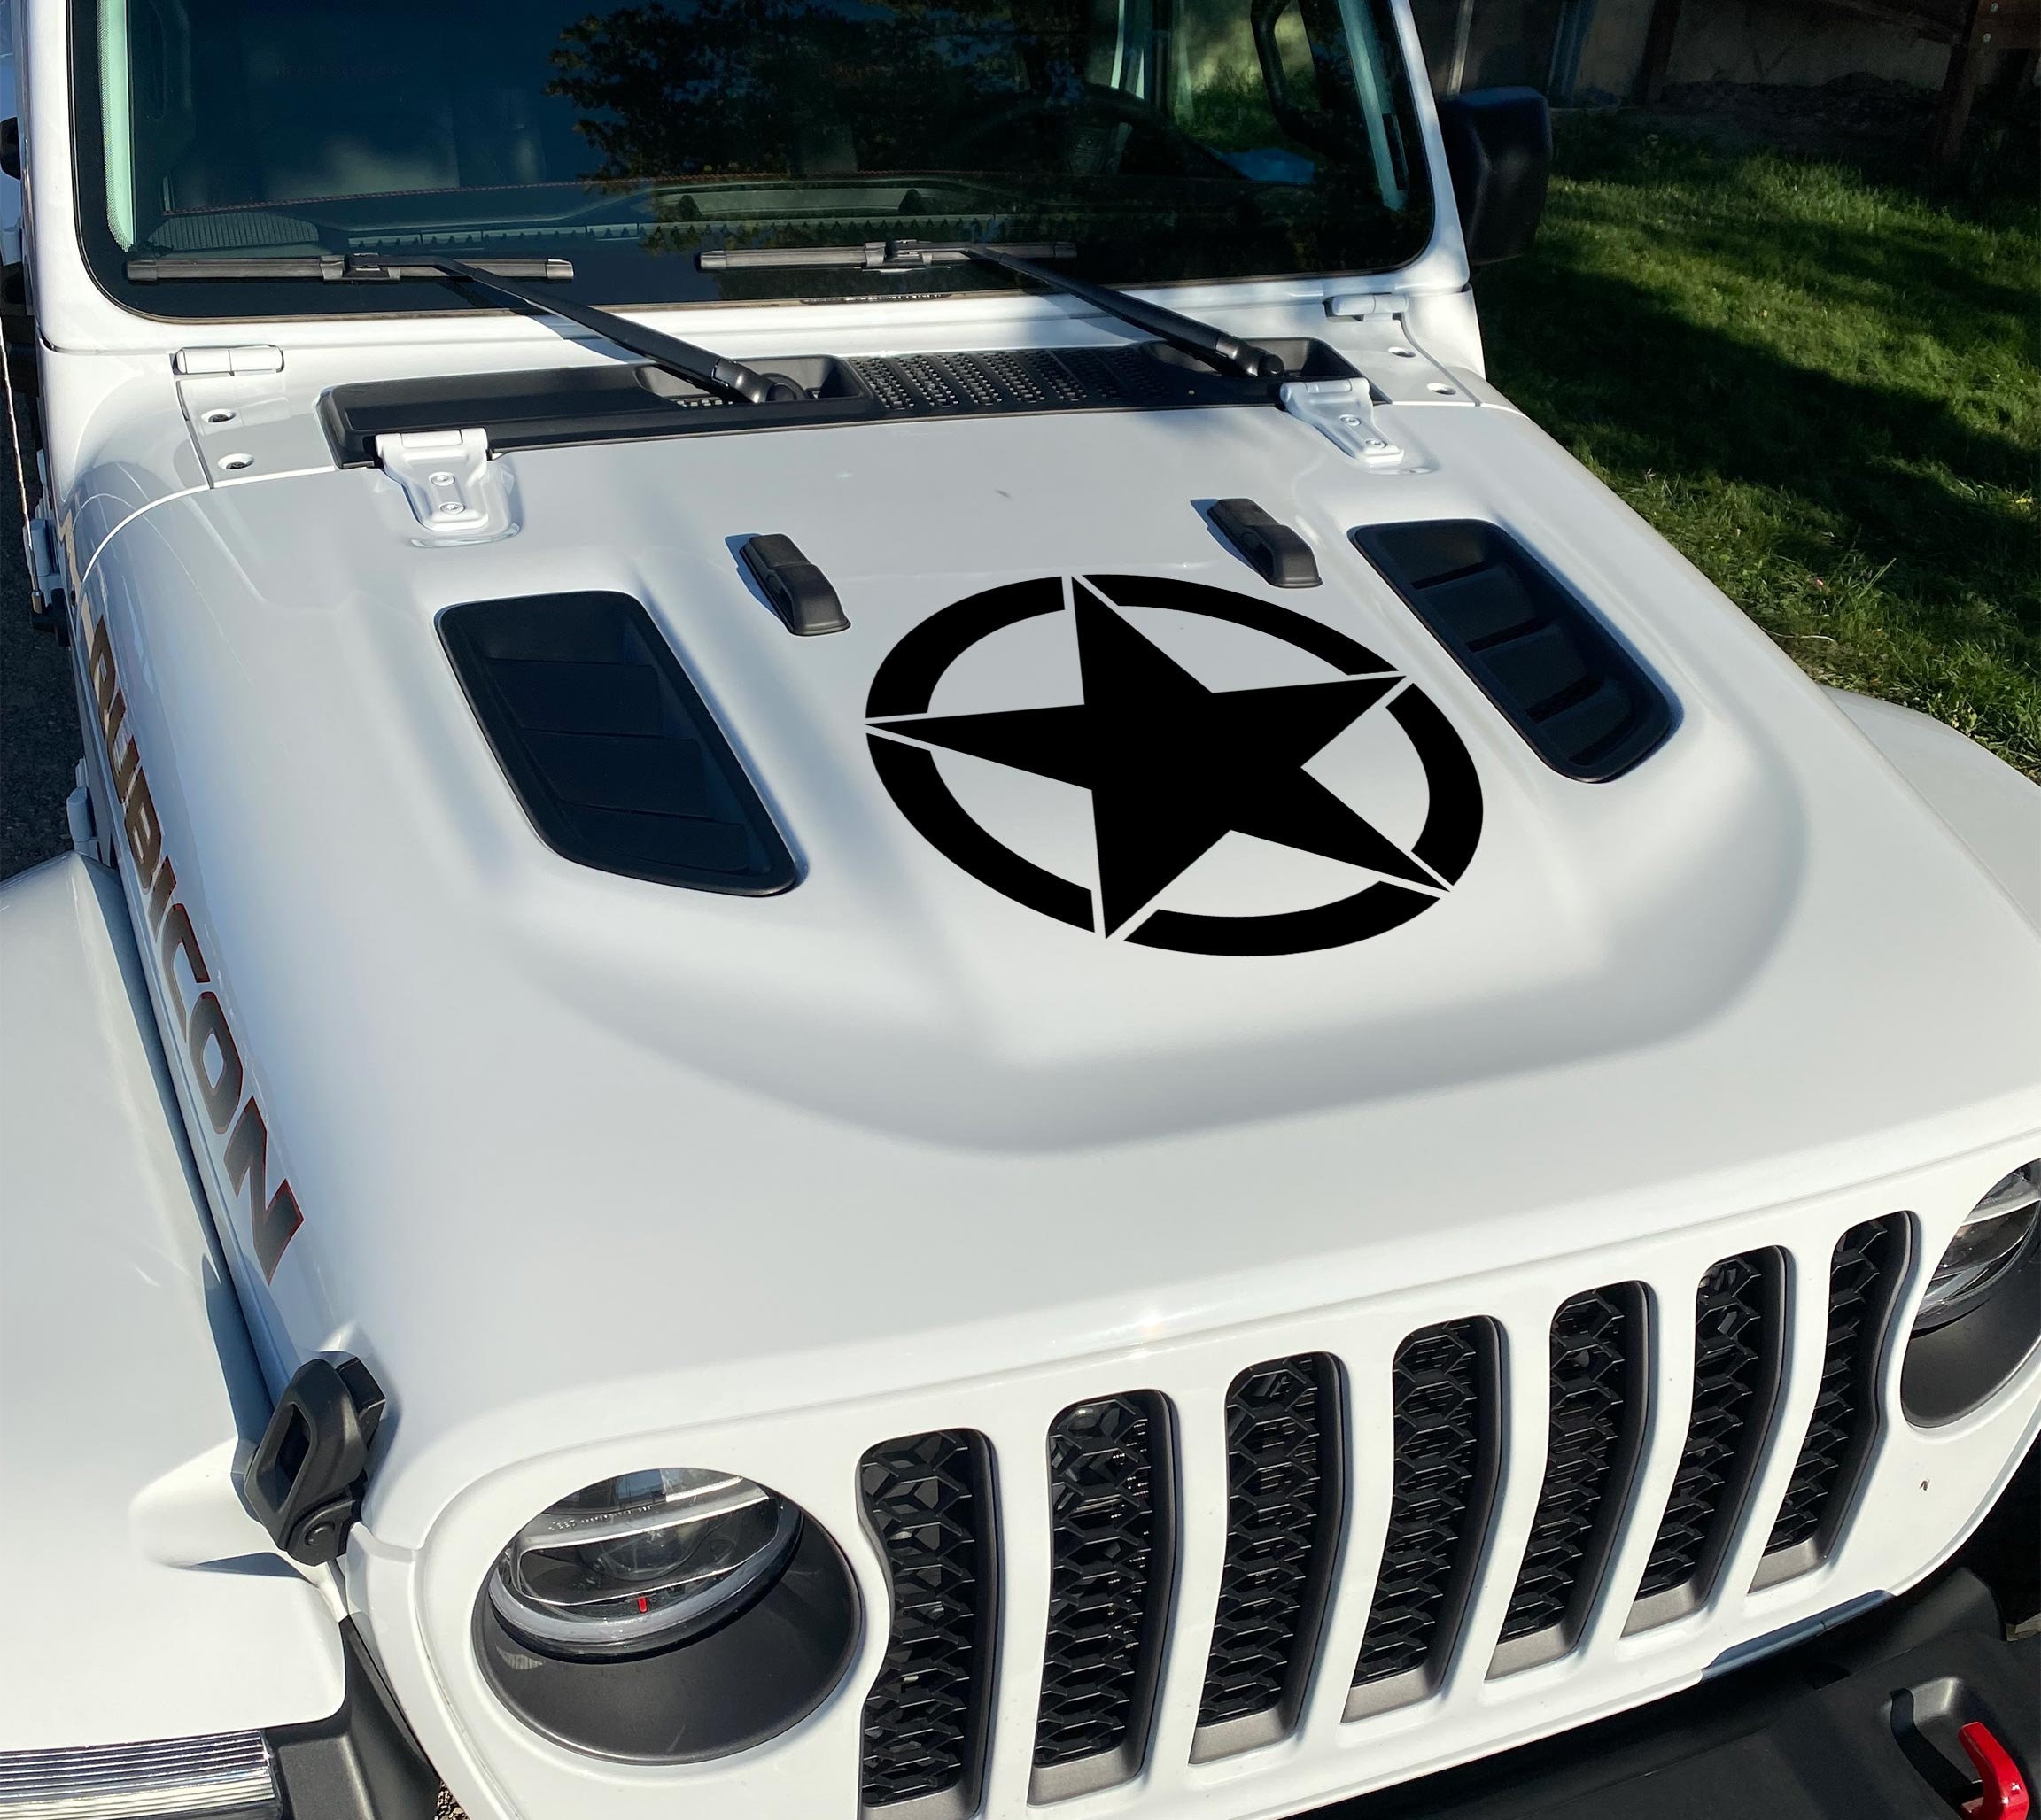 Military Decal Oscar Mike Army Star Fits Jeep Wrangler or - Etsy